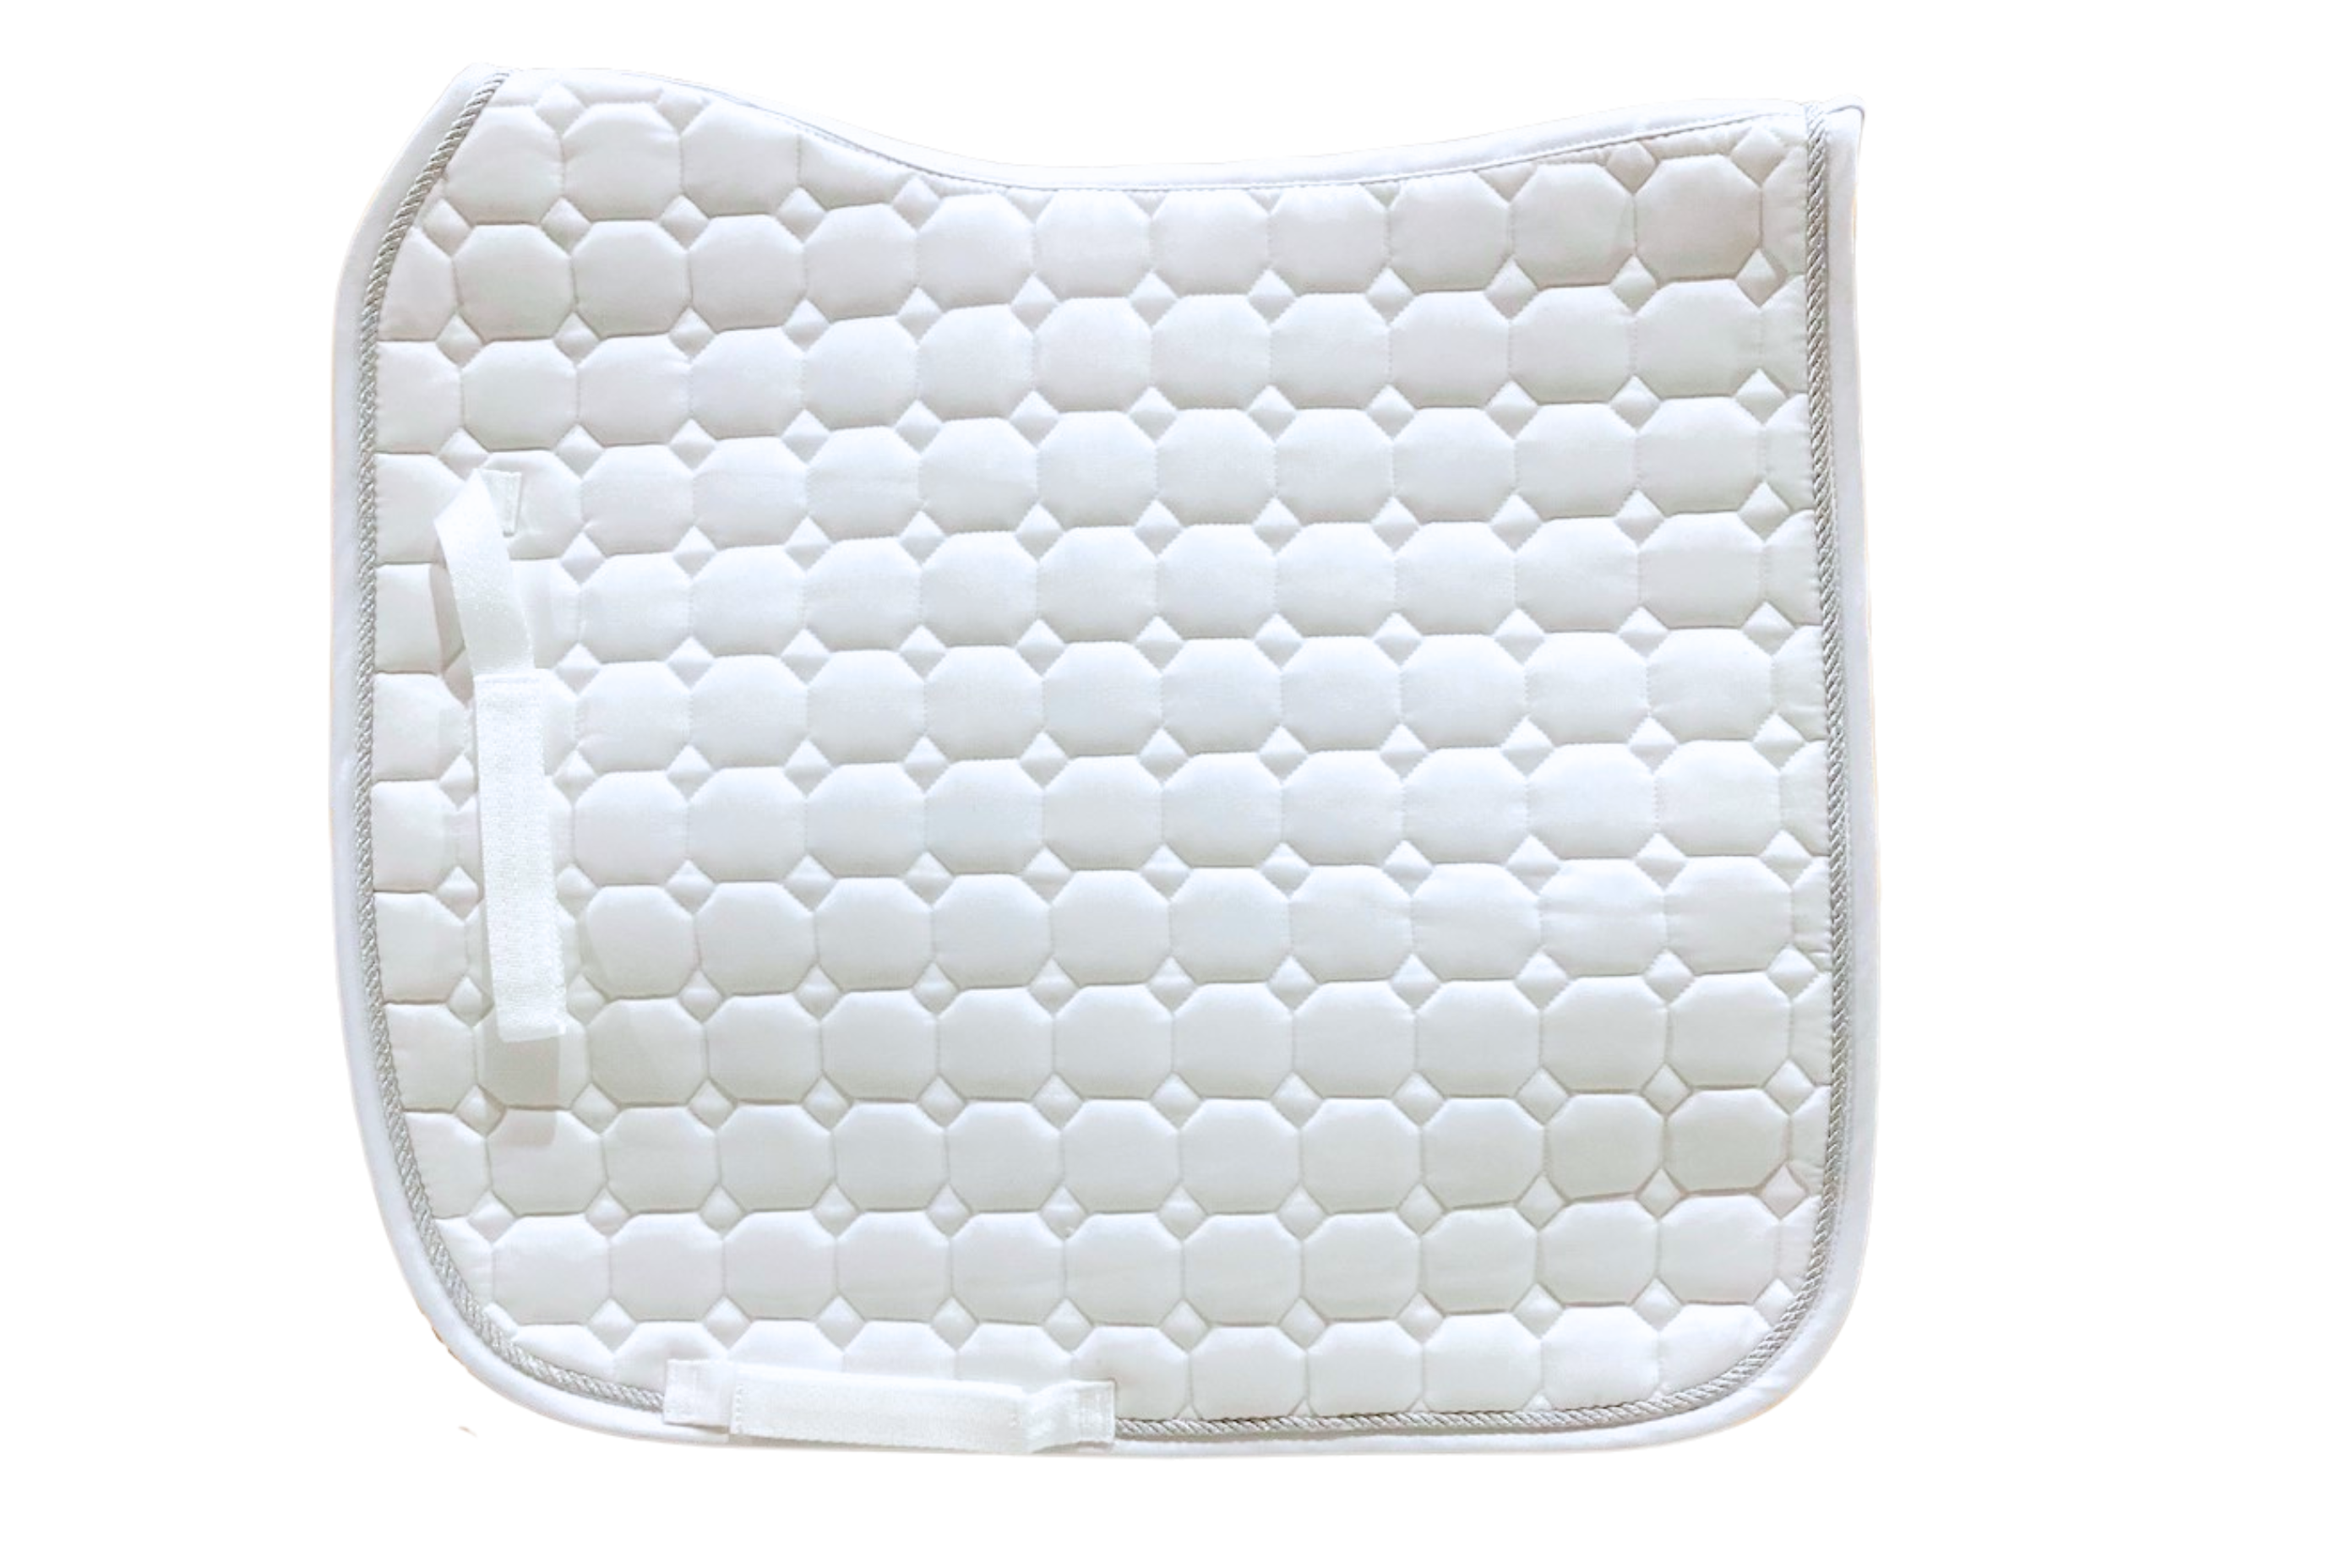 Topline Competition Dressage Saddle Pad with metallic silver rope - Design your own trim!!